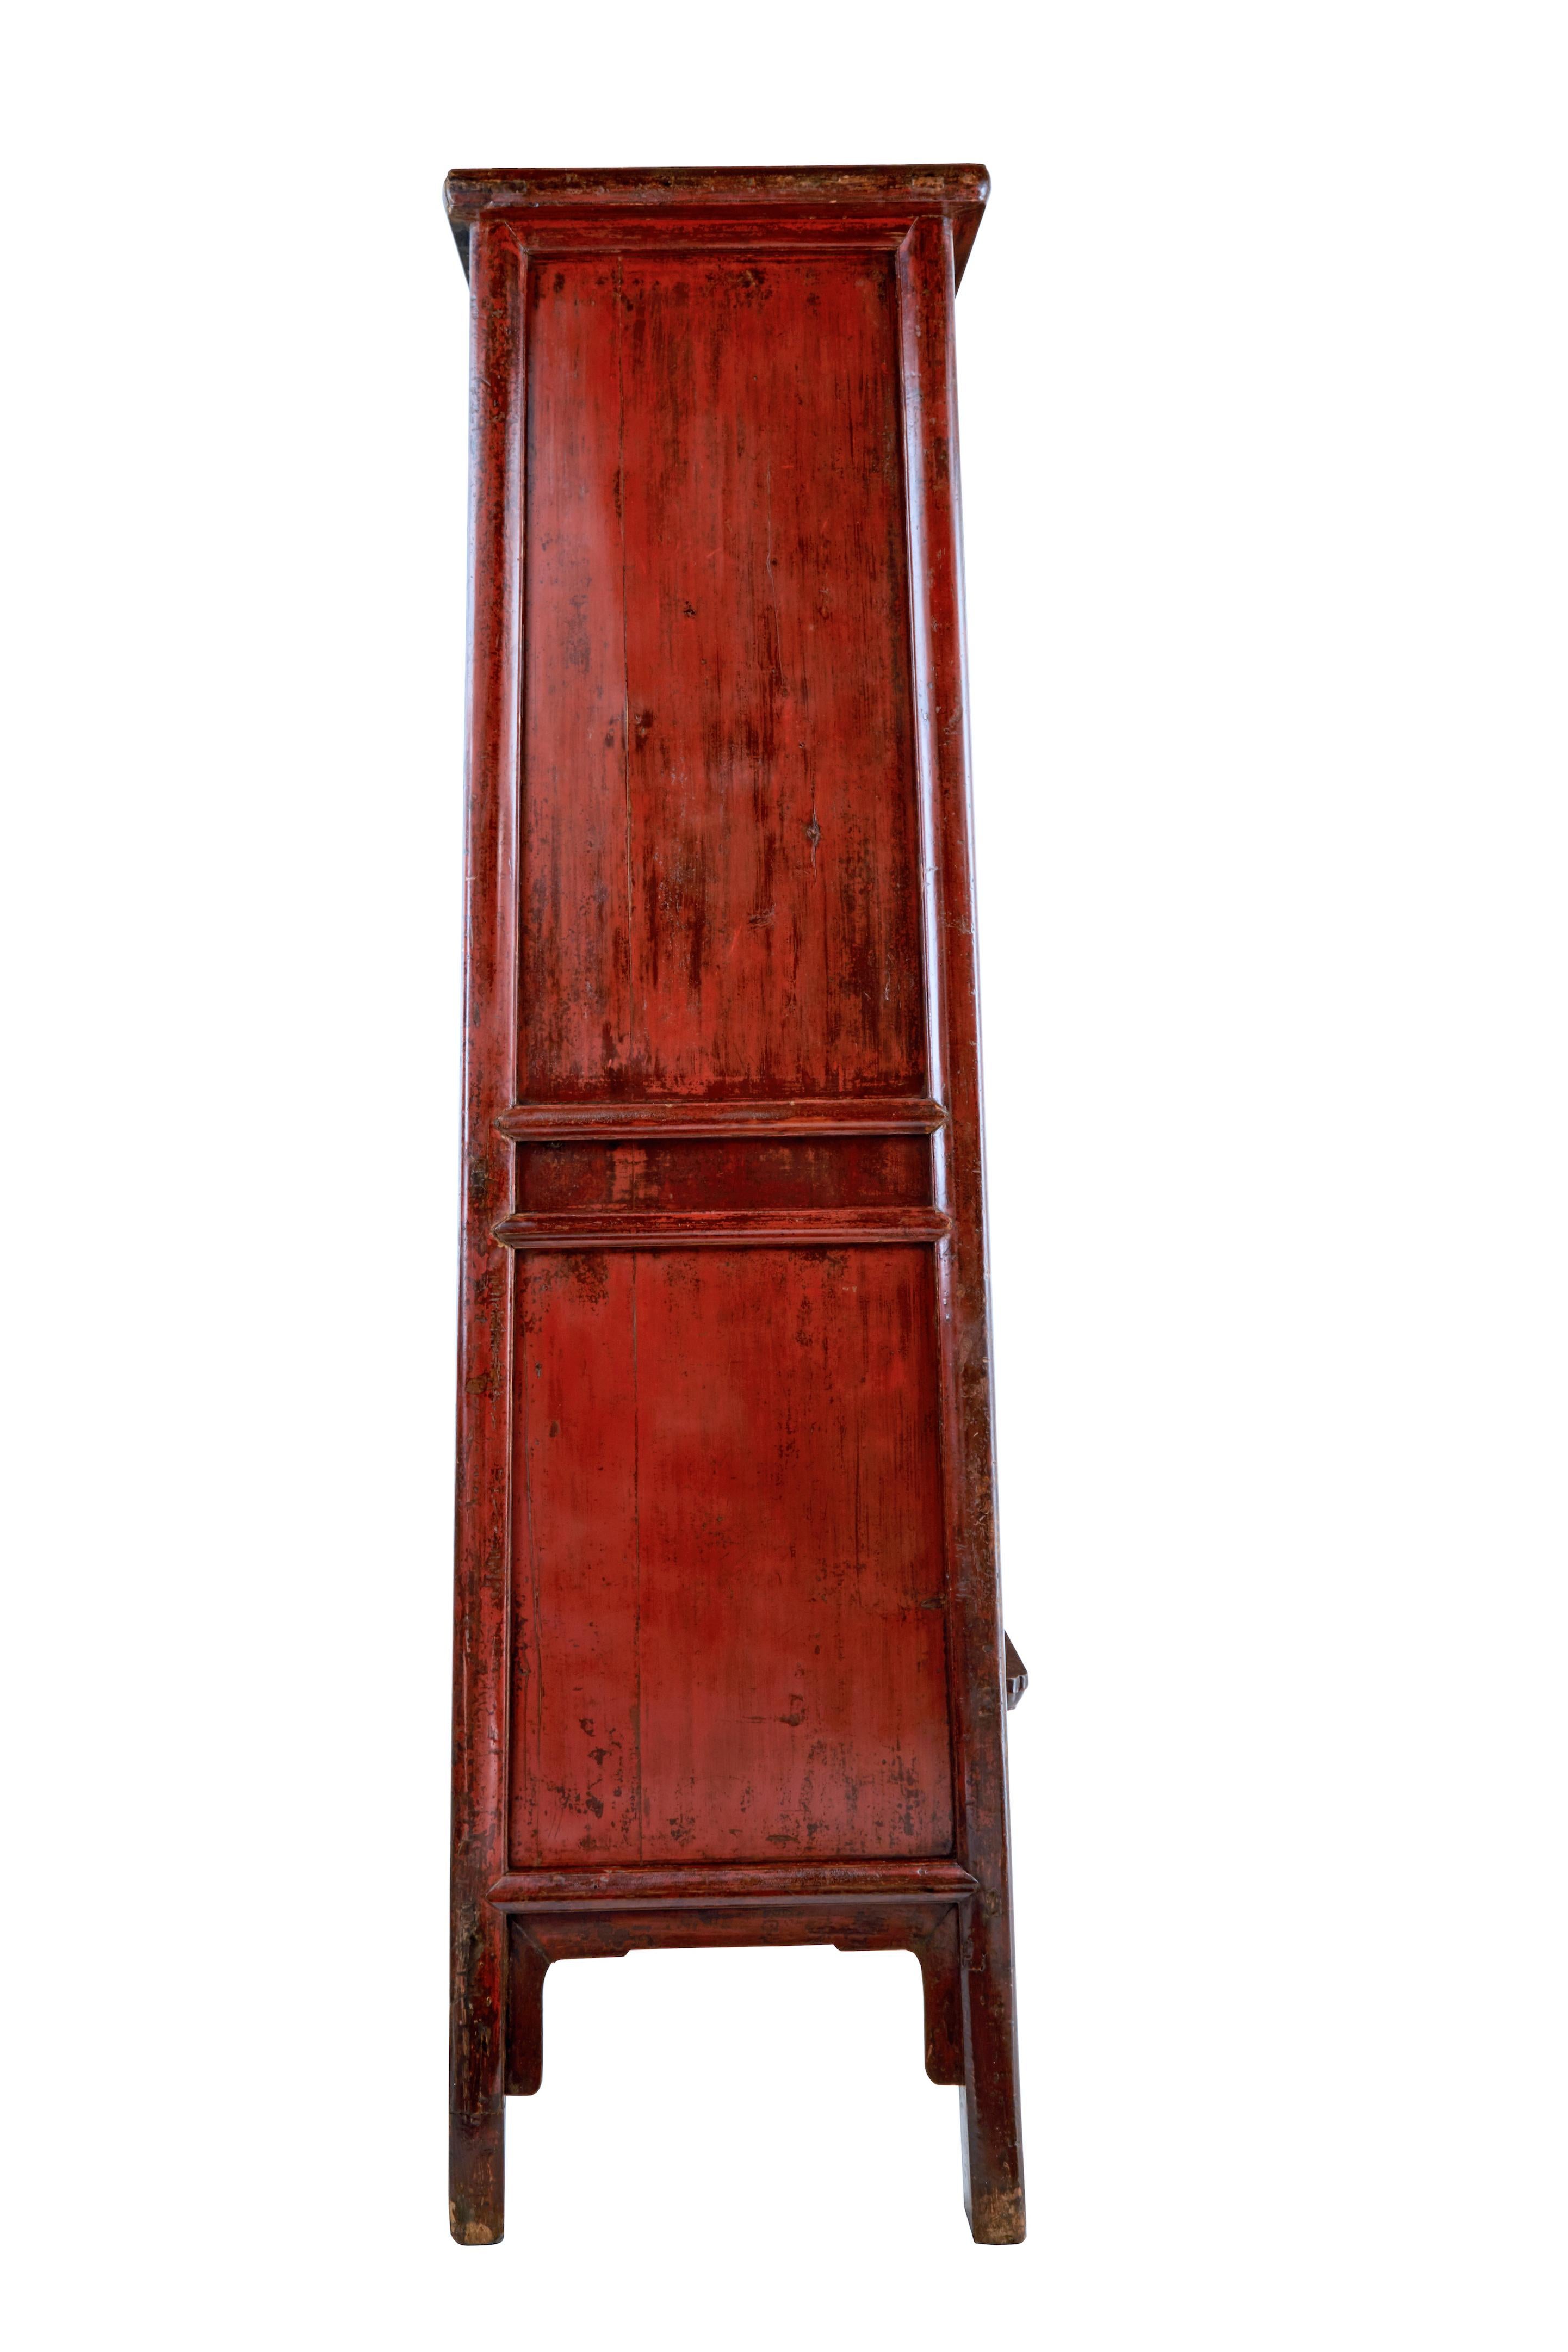 Monumental 19th Century Chinese Red Lacquer Cupboard In Good Condition For Sale In Debenham, Suffolk